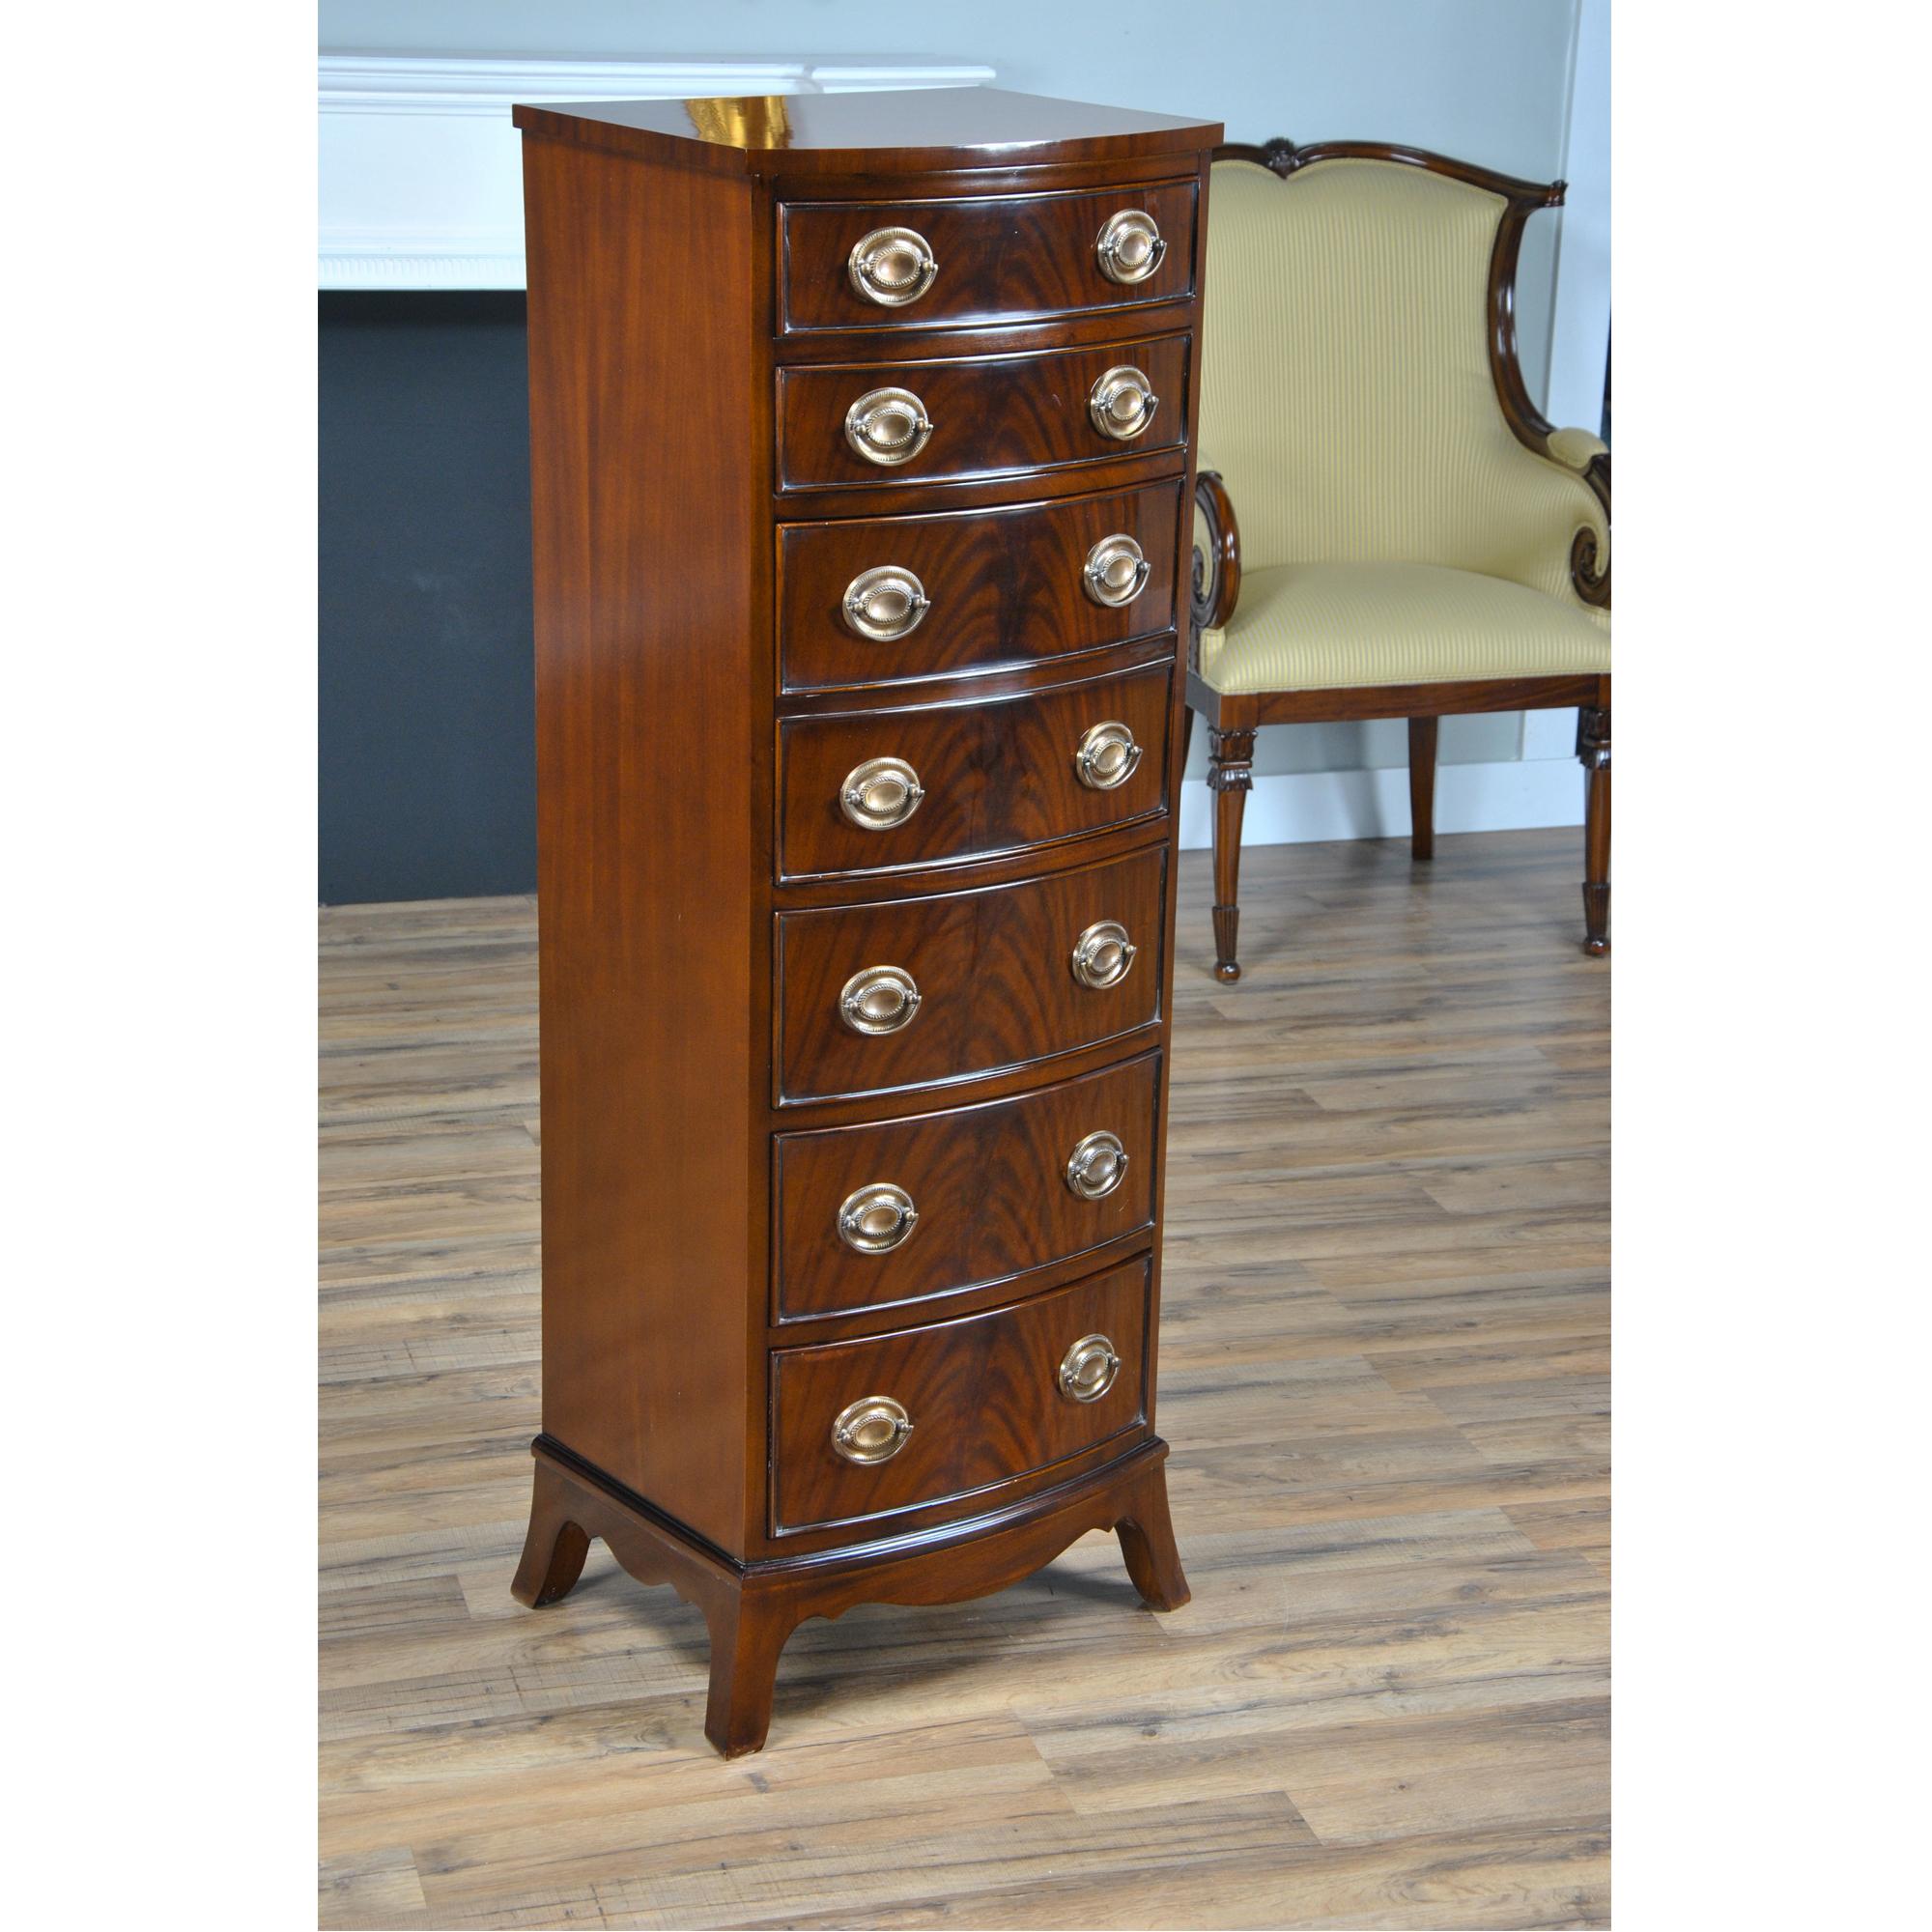 The Niagara Furniture Hidden Drawer Desk, a luxury piece of fine furniture with a hidden surprise inside. This tall chest was originally designed for lingerie but we have redesigned it to hold a small writing desk with a small drawer, and storage